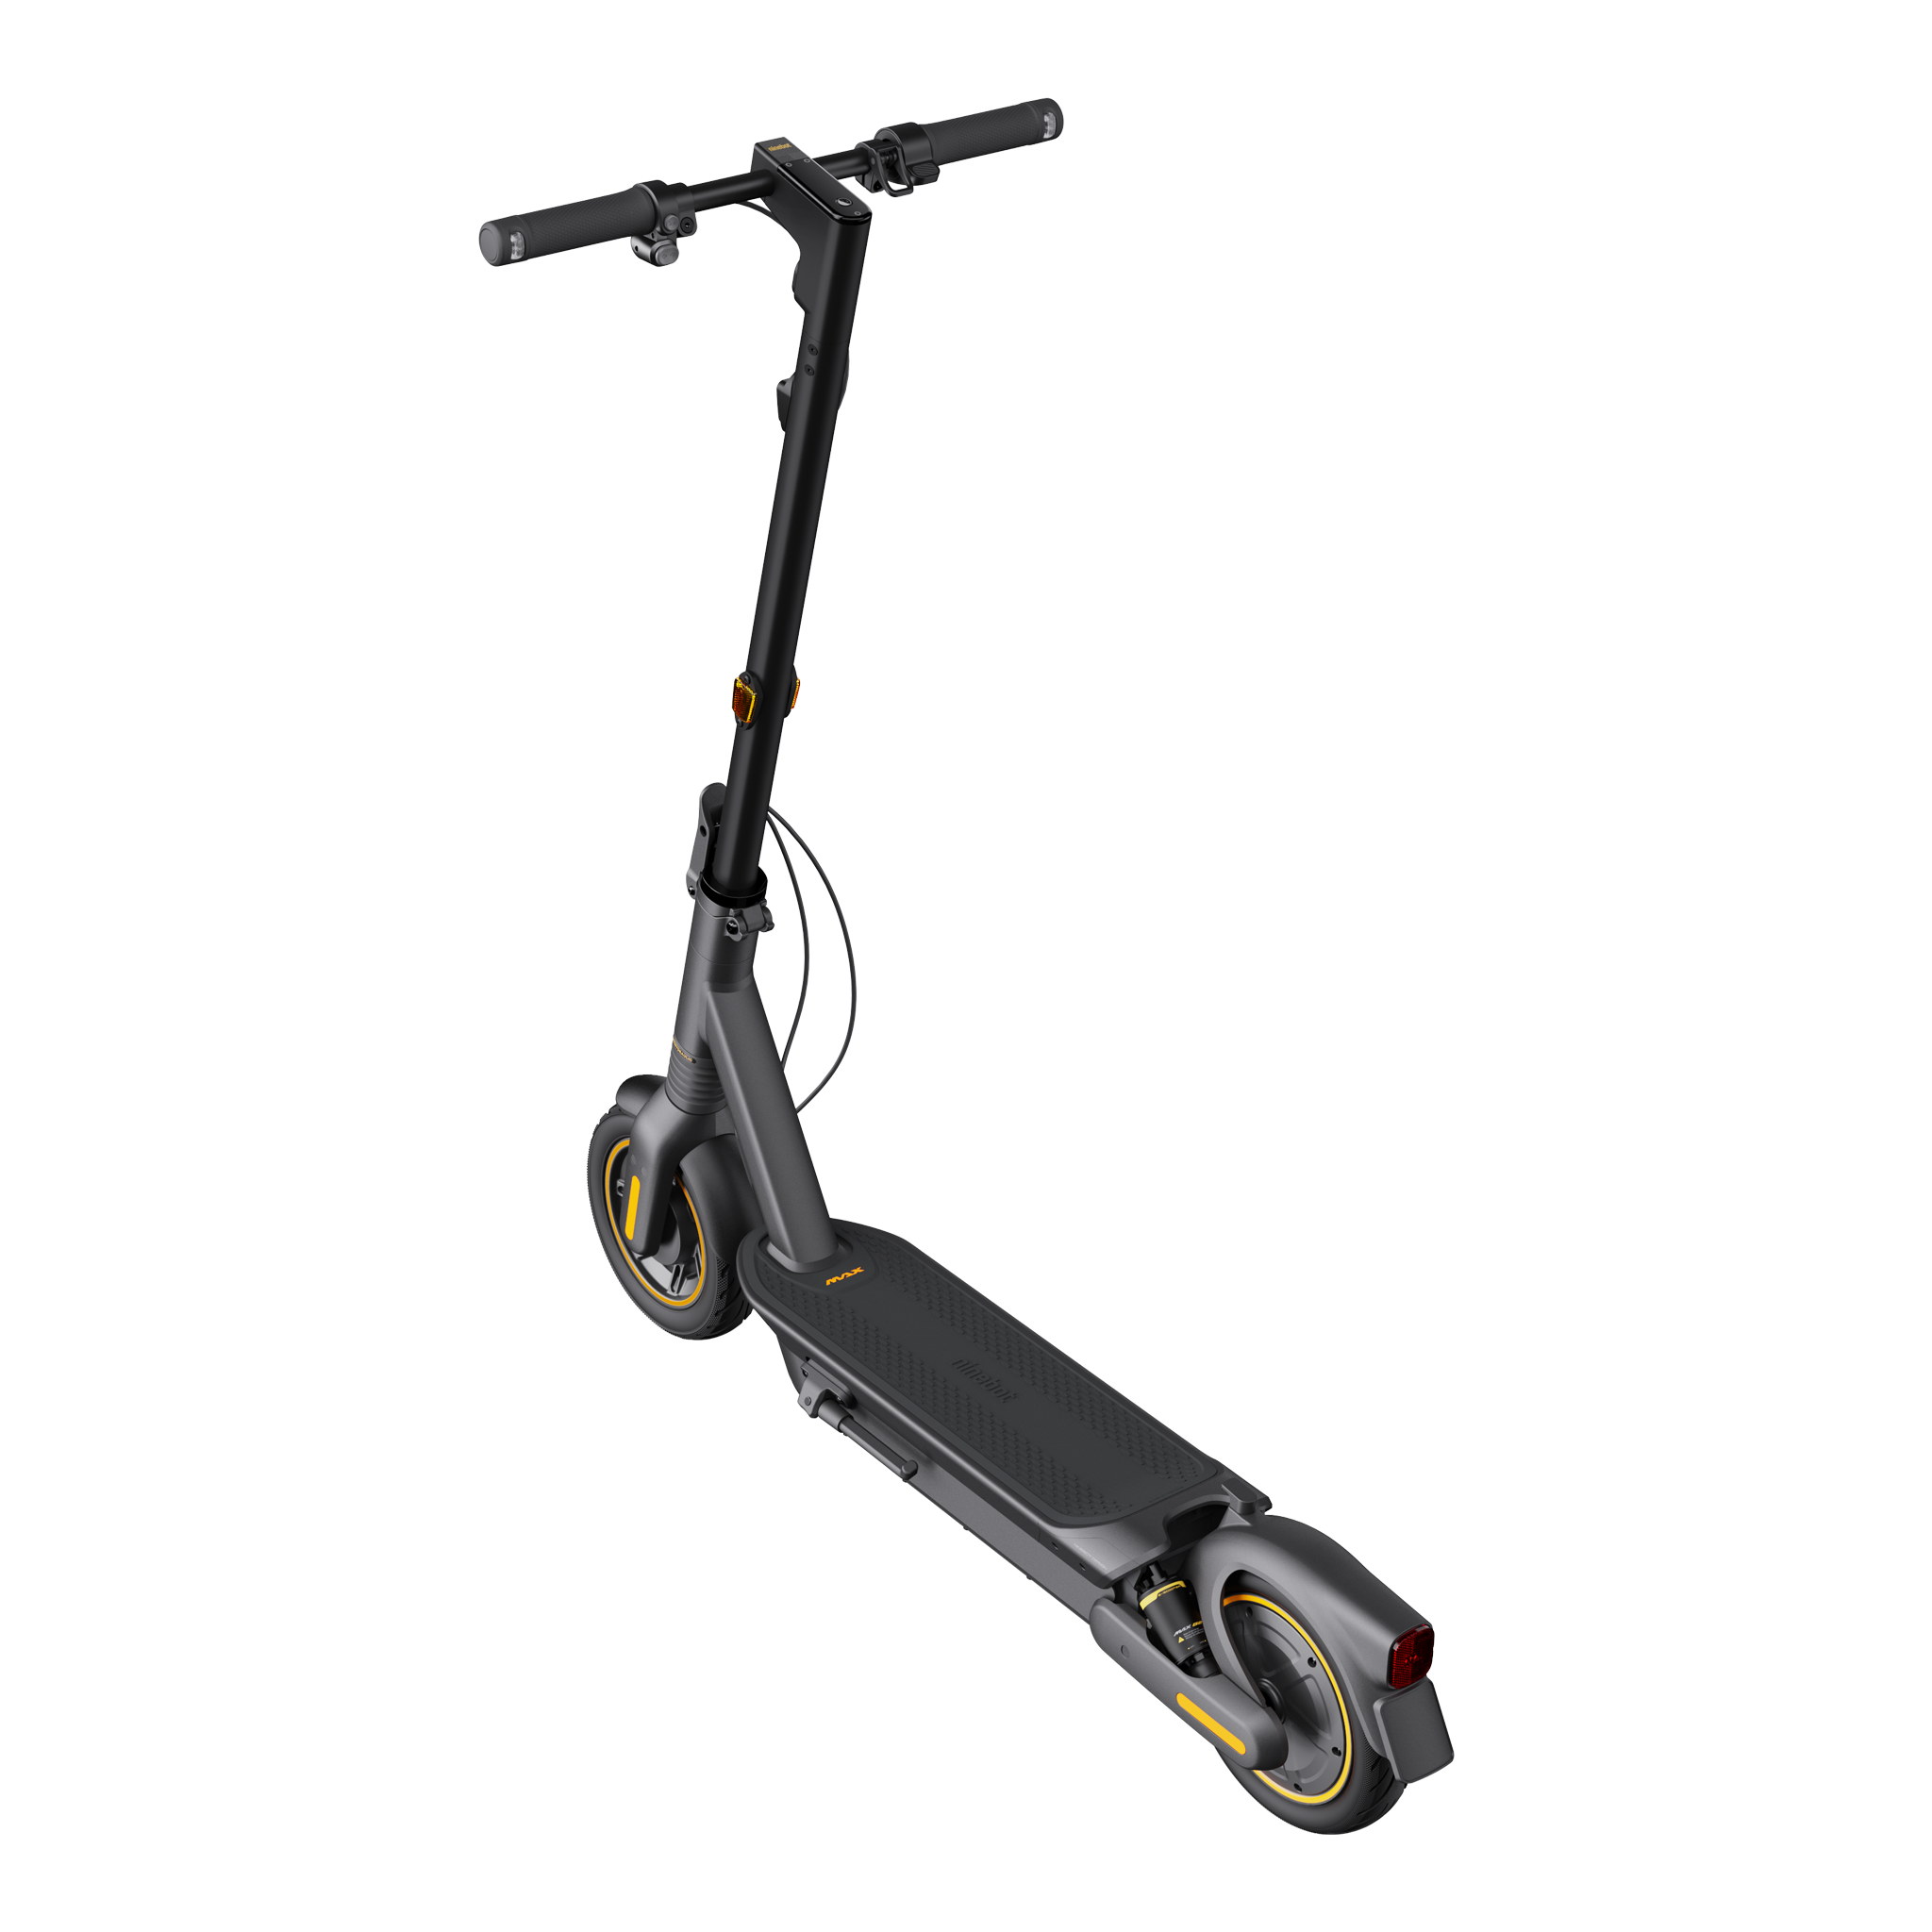 Ninebot KickScooter MAX, Electric Scooter